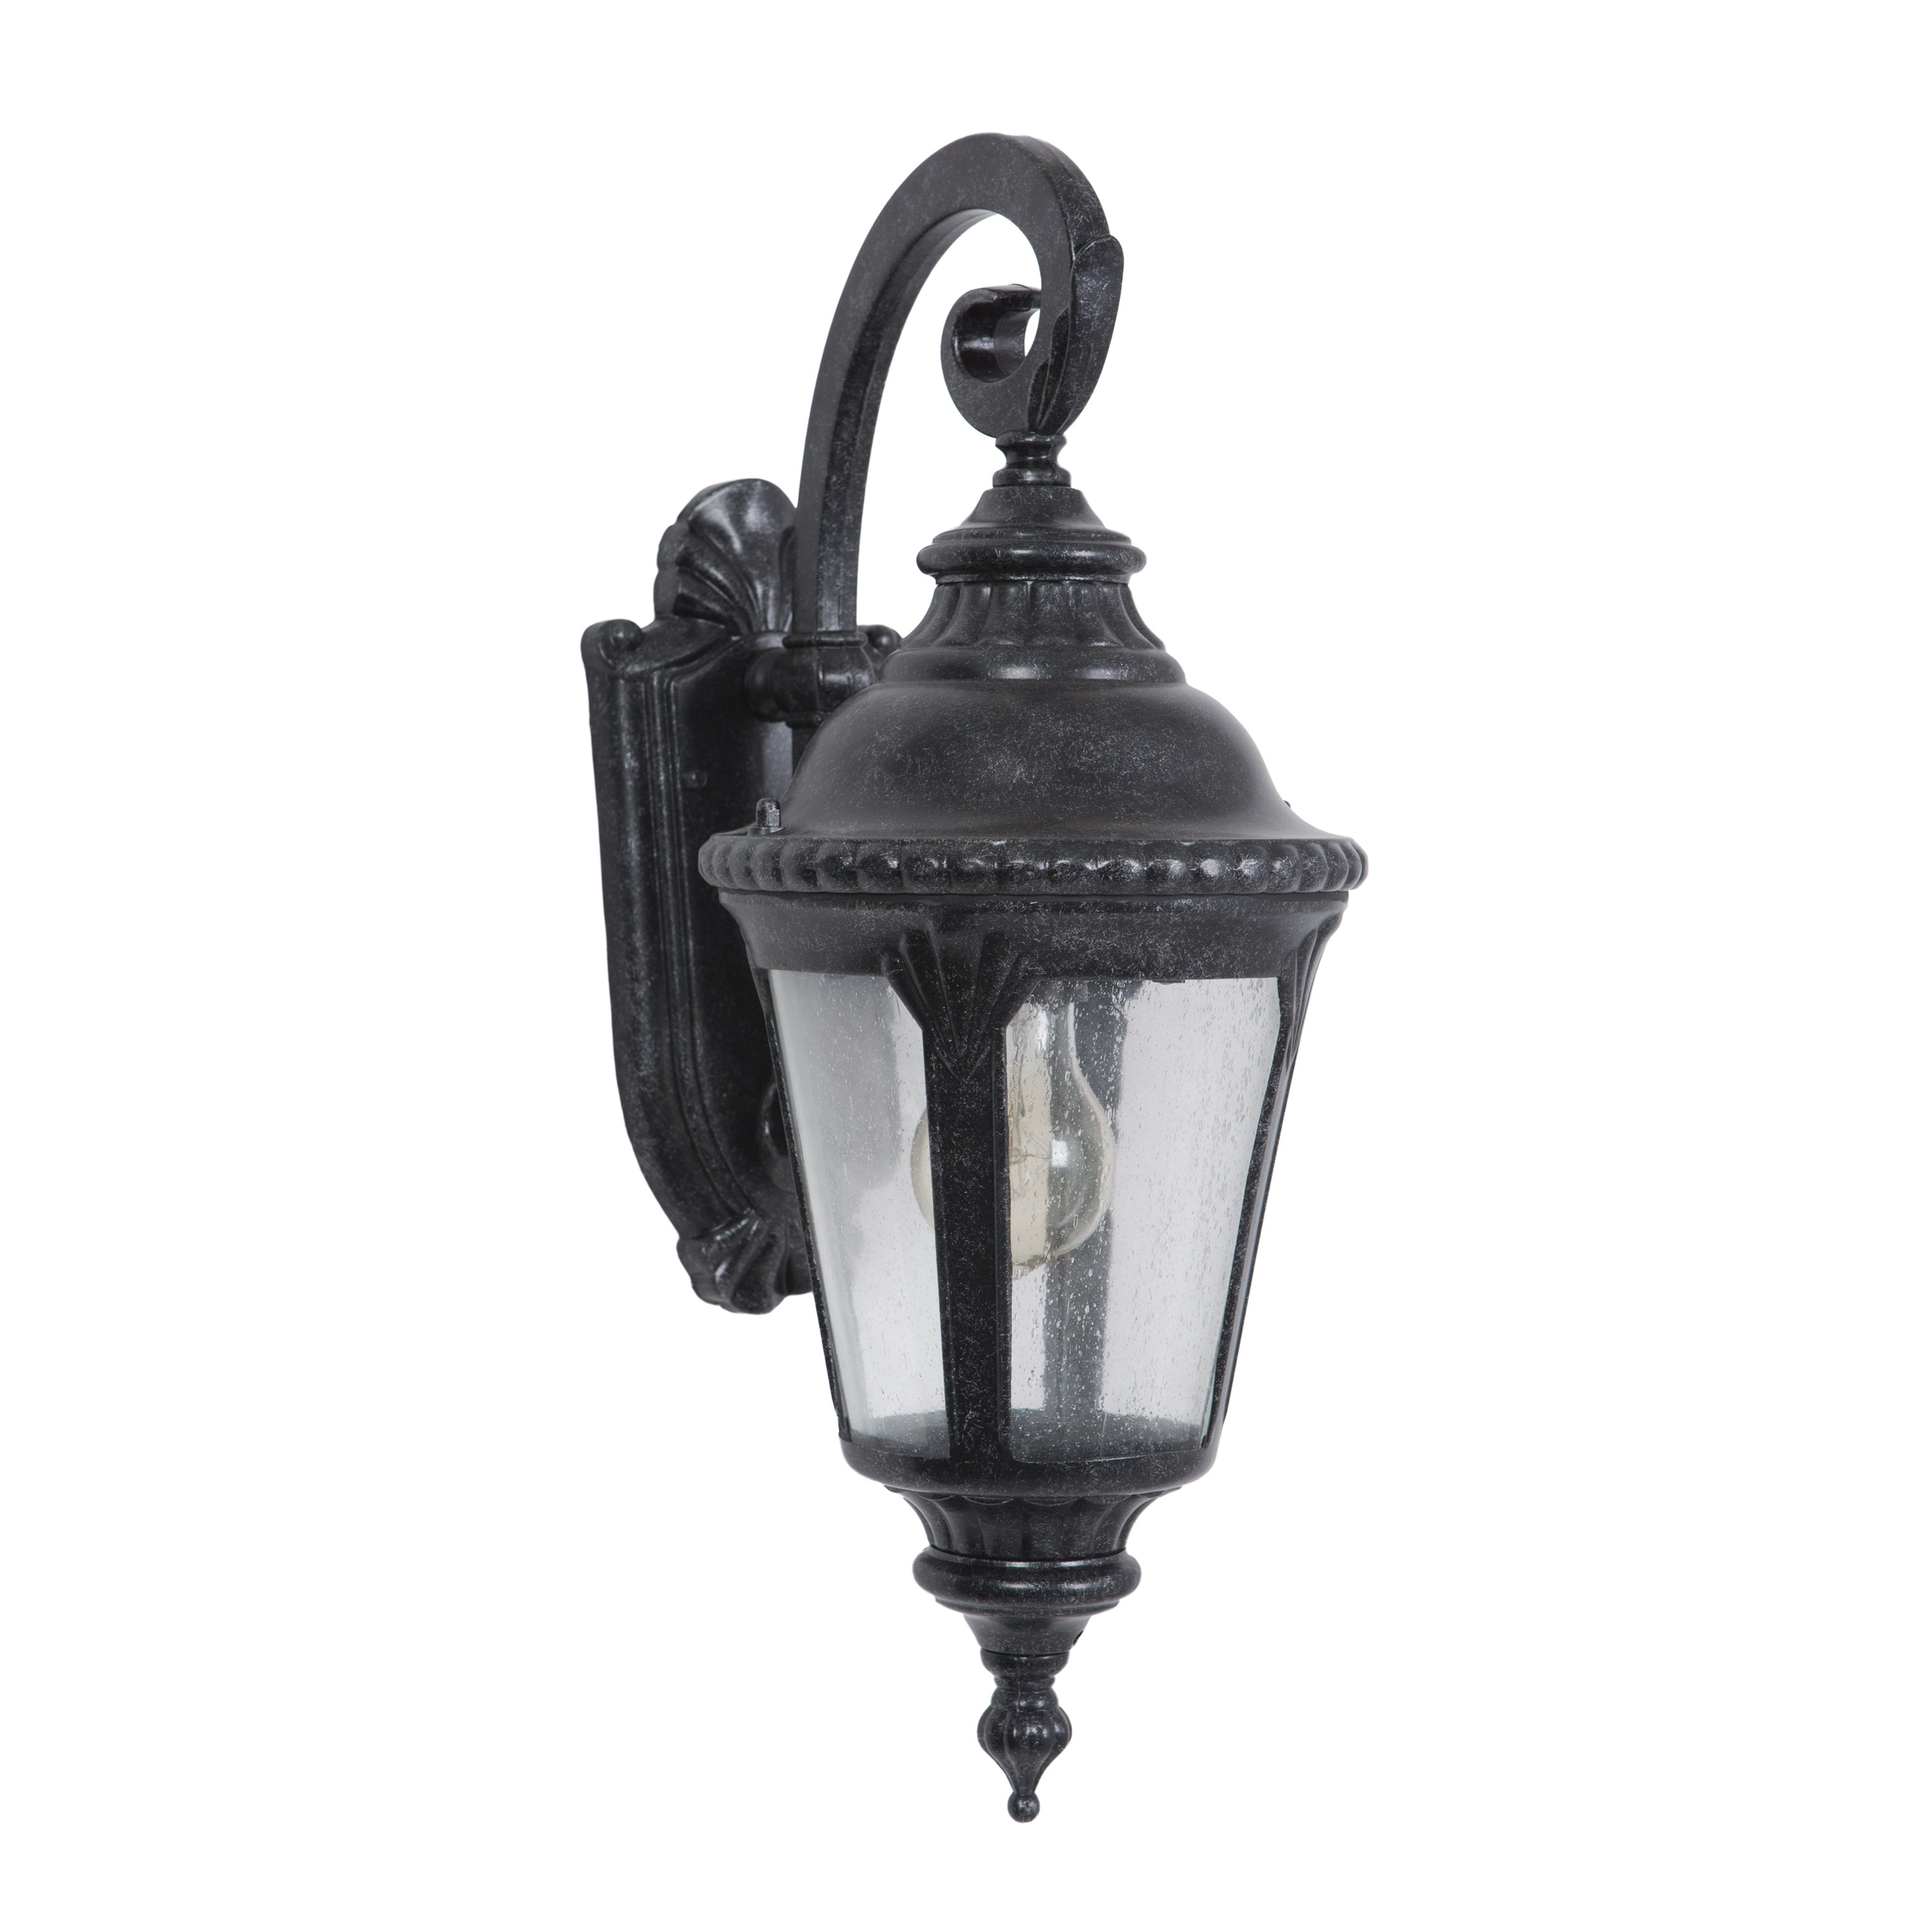 Yosemite Home Decor Columbus 7201ST-1 Outdoor Wall Sconce - image 3 of 4